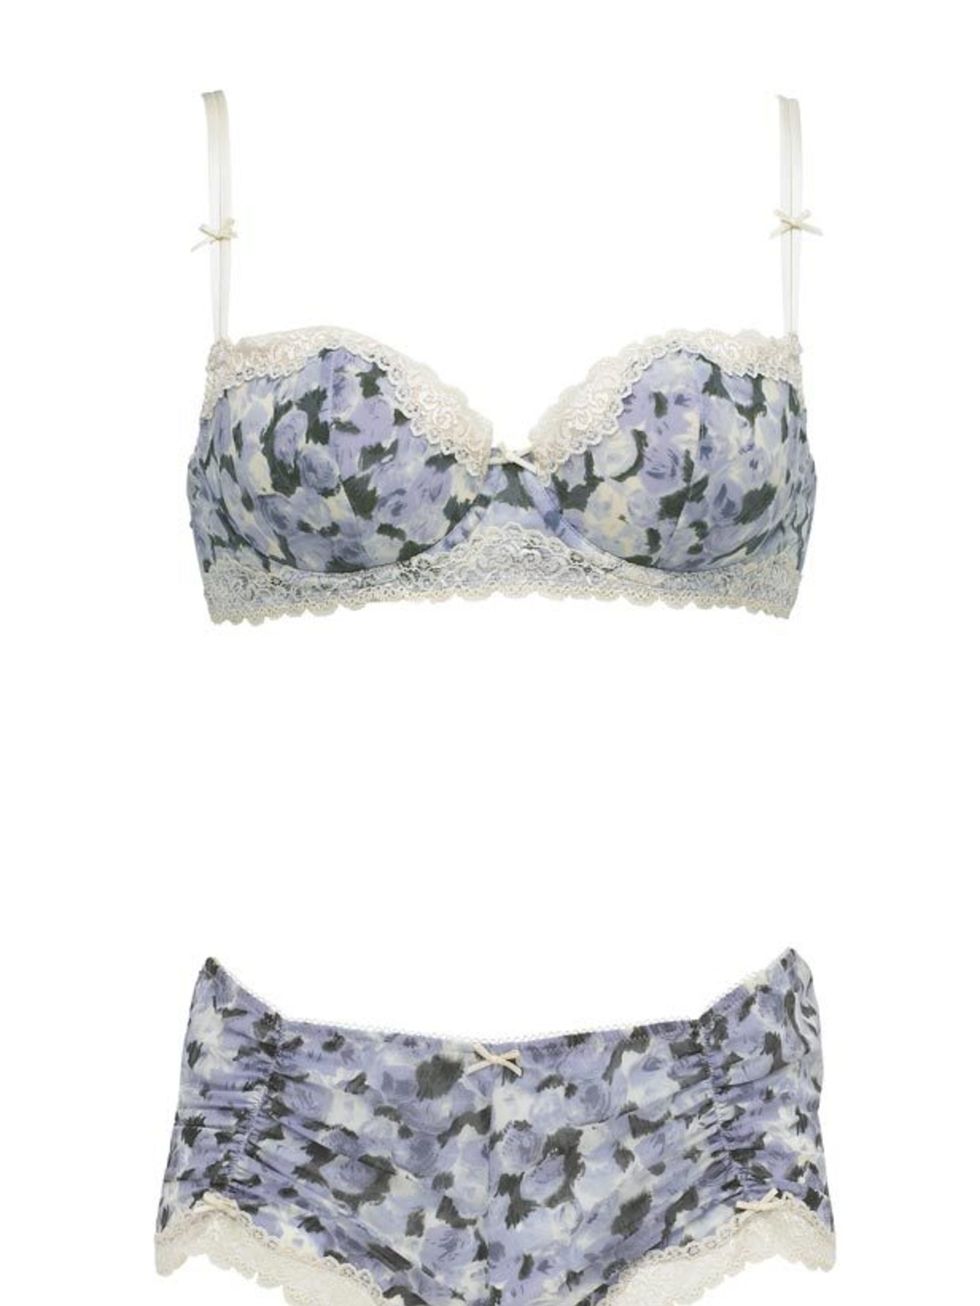 <p>M&amp;S has always been our go-to for lingerie essentials. And now its latest collaboration with Collete Dinnigan has thrown up some rather irresistible pieces. Well be dashing out at lunch to get our hands on this silk set <a href="http://www.marksa